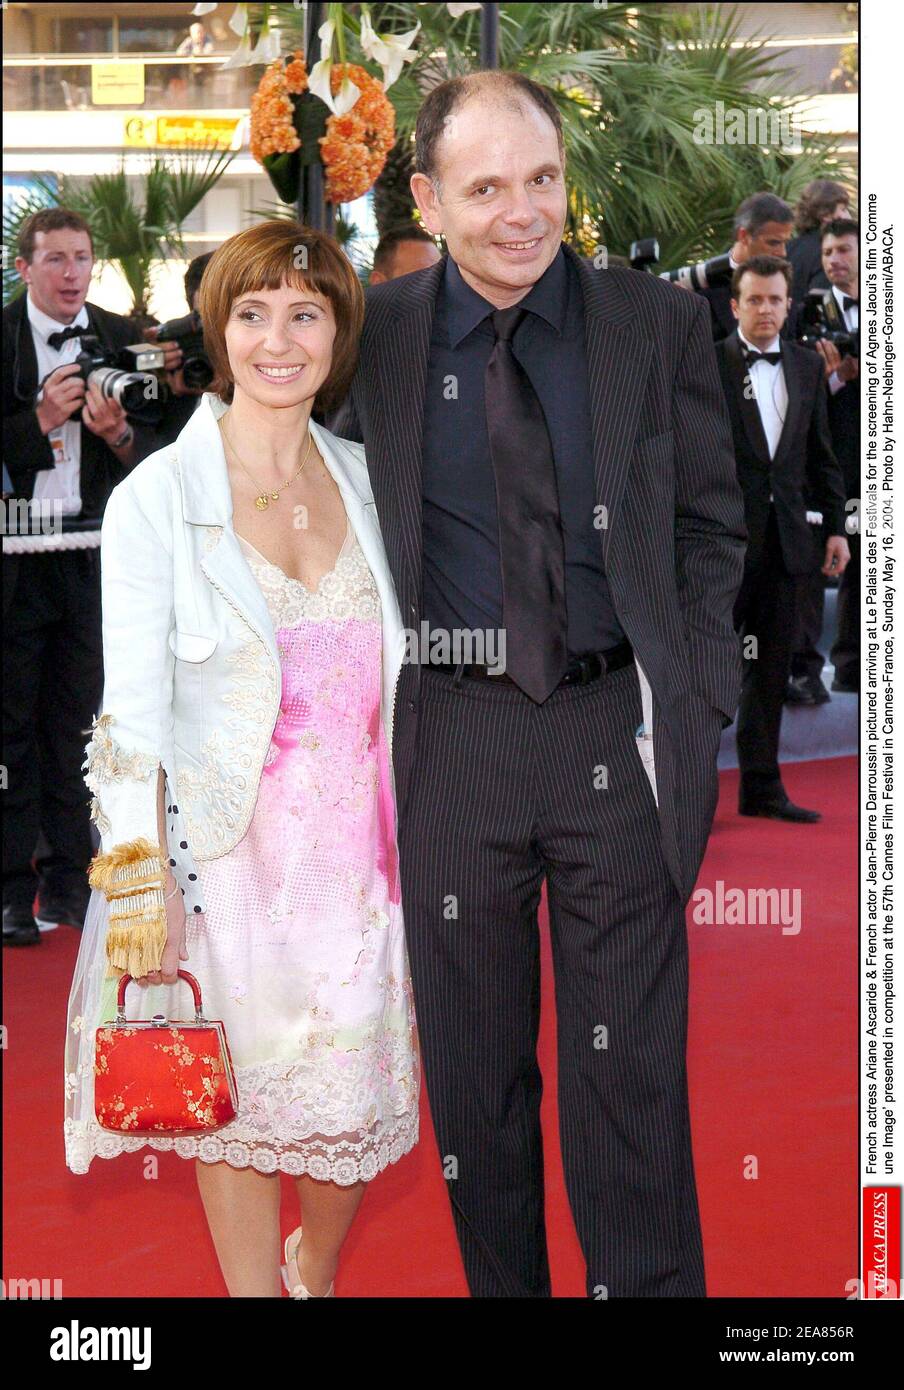 French actress Ariane Ascaride & French actor Jean-Pierre Darroussin pictured arriving at Le Palais des Festivals for the screening of Agnes Jaoui's film ïComme une Image' presented in competition at the 57th Cannes Film Festival in Cannes-France, Sunday May 16, 2004. Photo by Hahn-Nebinger-Gorassini/ABACA. Stock Photo